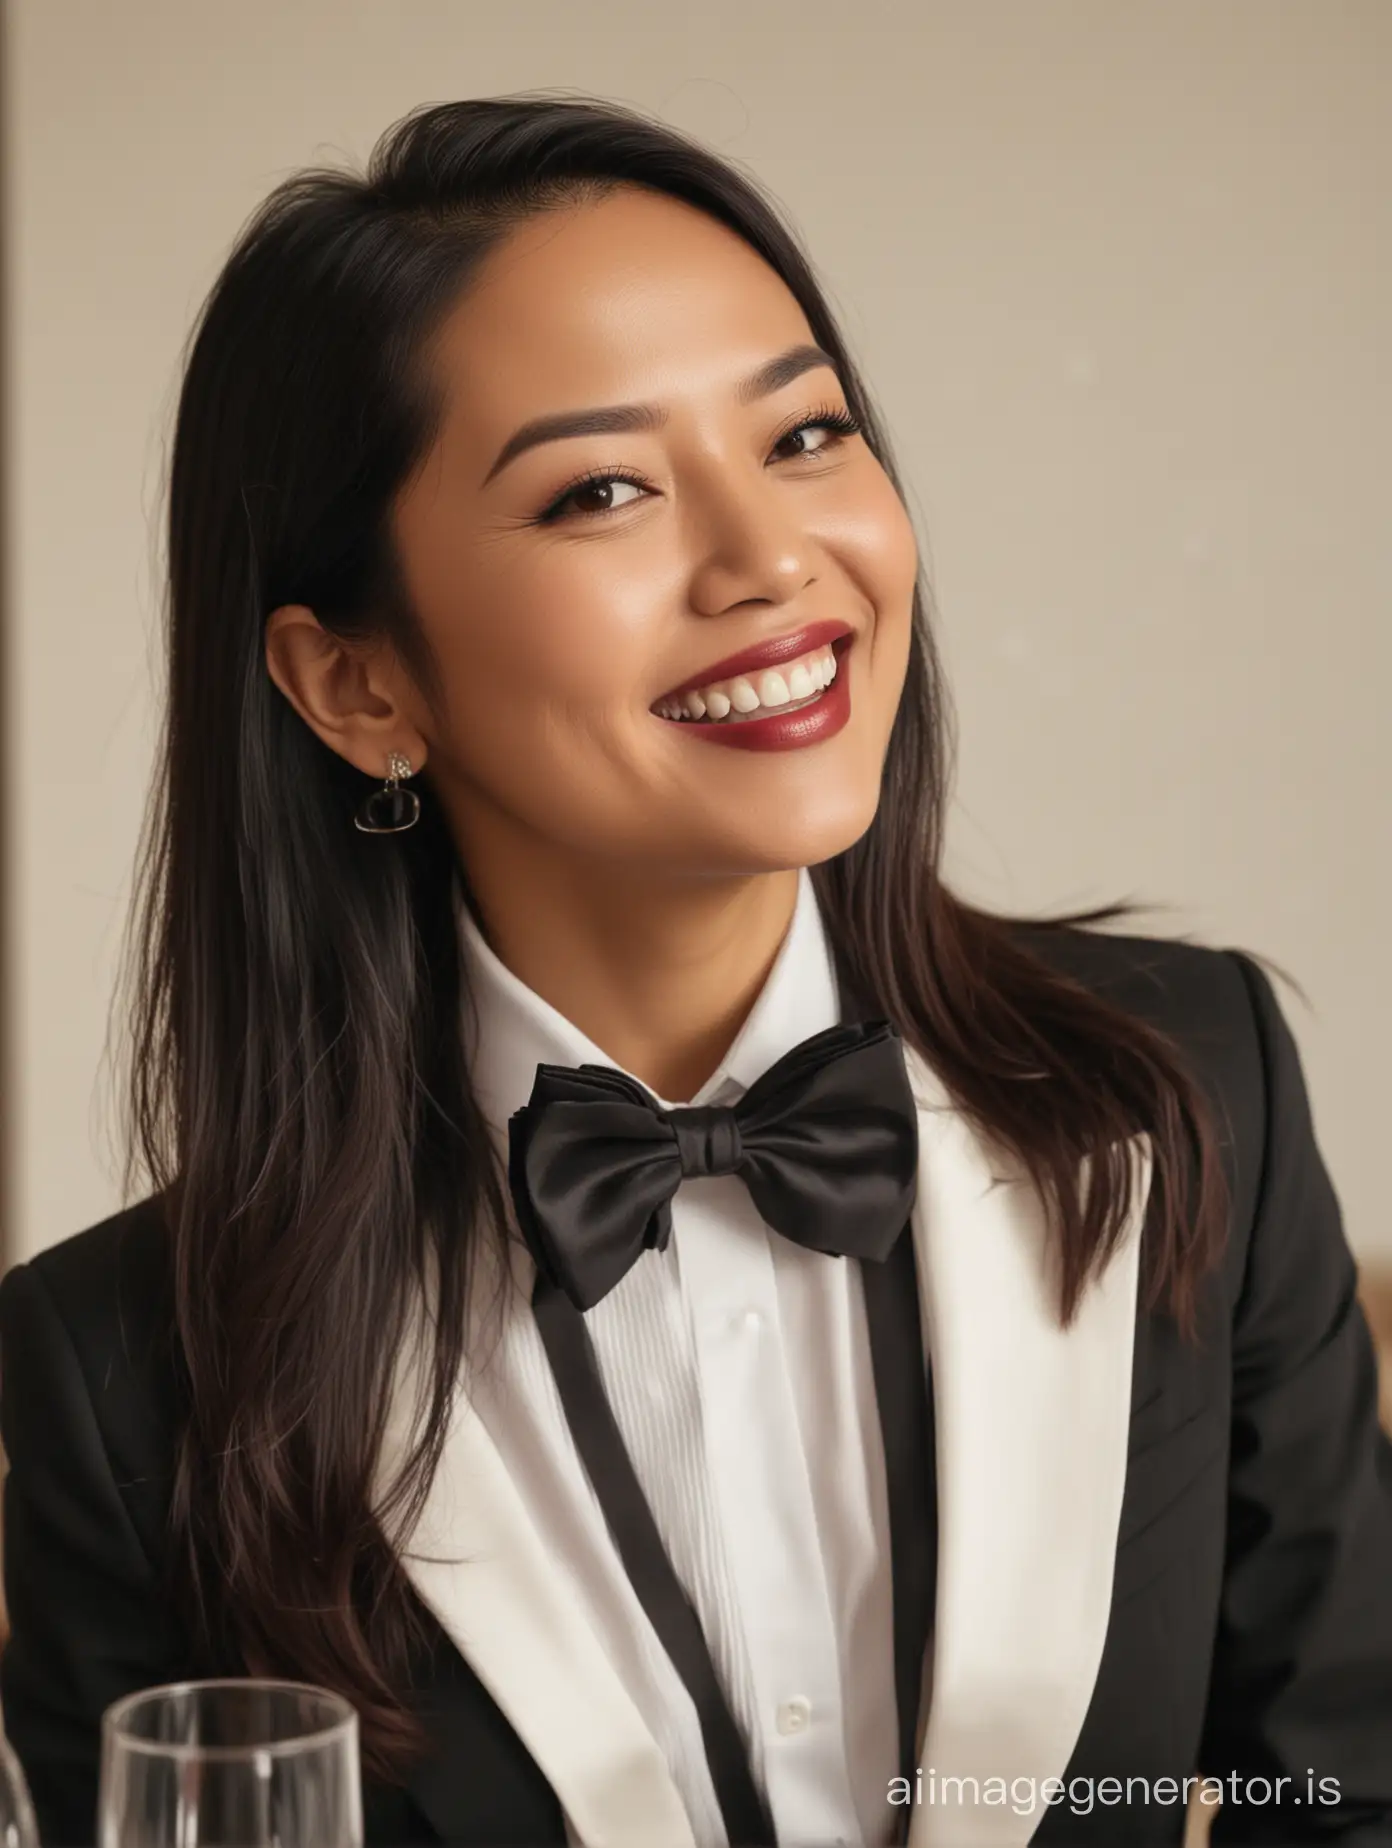 40 year old smiling and laughing malaysian woman with long hair and lipstick wearing a tuxedo with a black bow tie. She is at a dinner table.